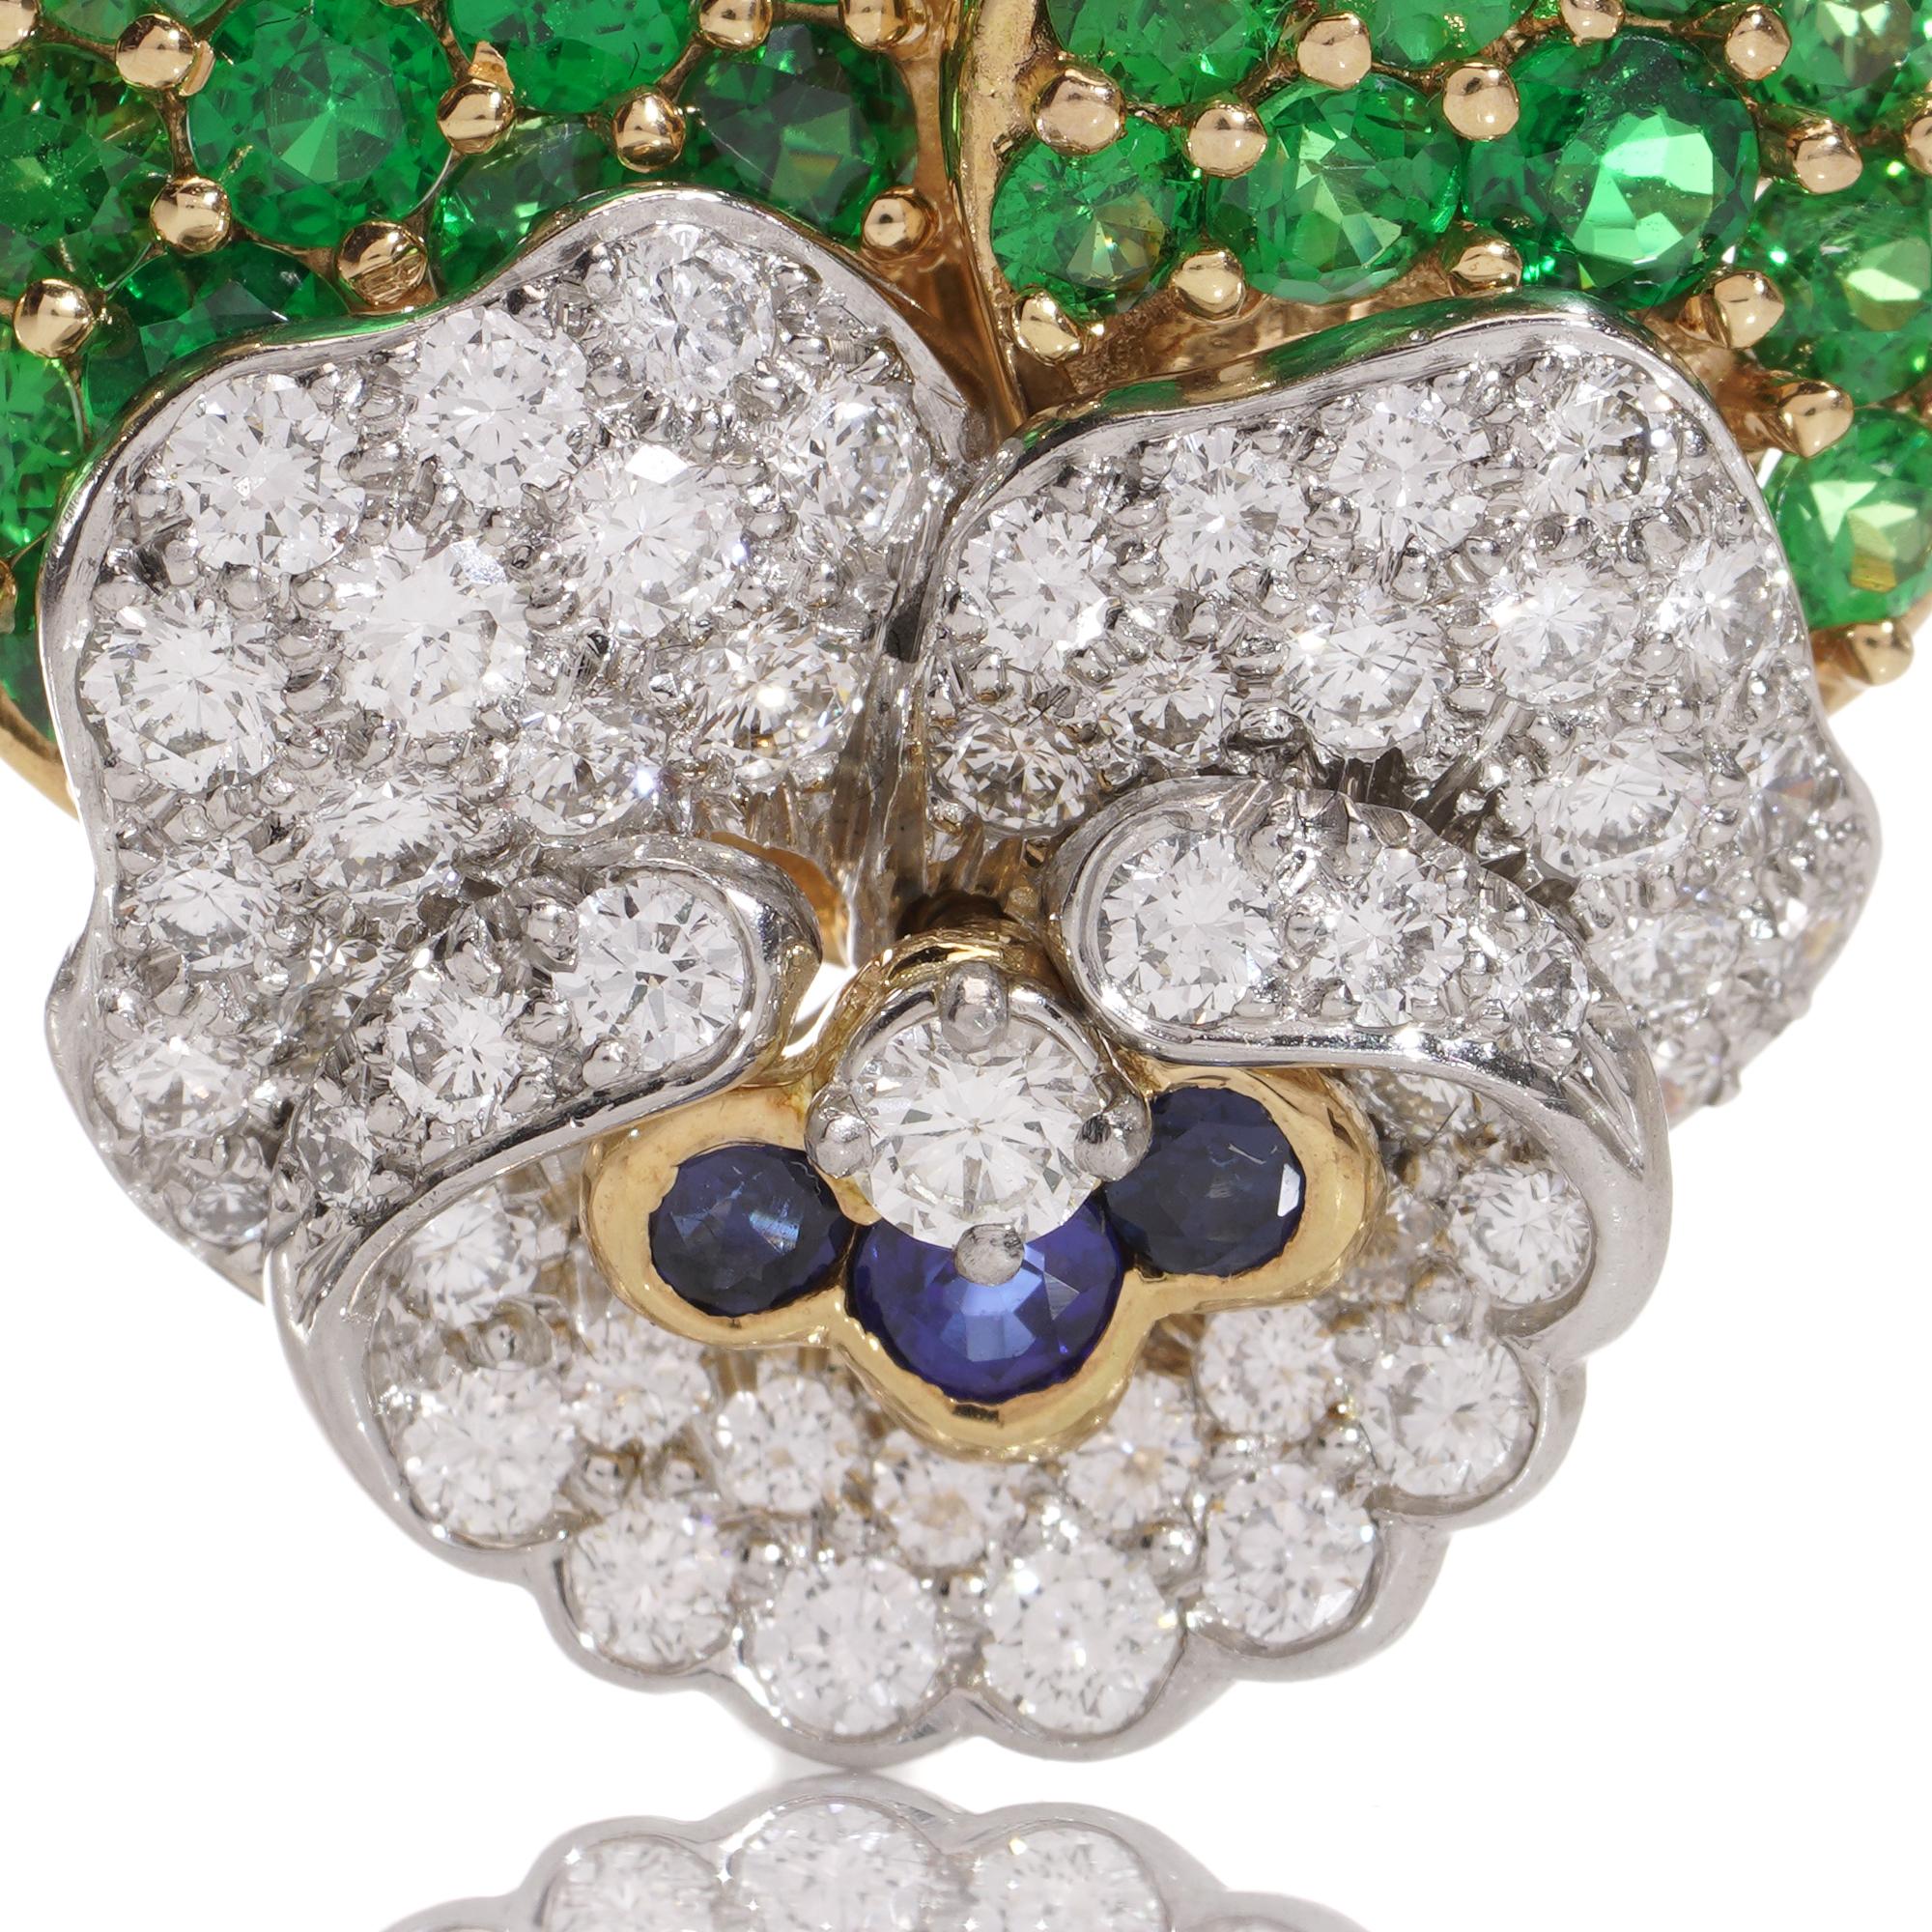 Tiffany & Co. Pansy Brooch with Diamonds, Sapphires, Tsavorite Garnets In Excellent Condition For Sale In Braintree, GB